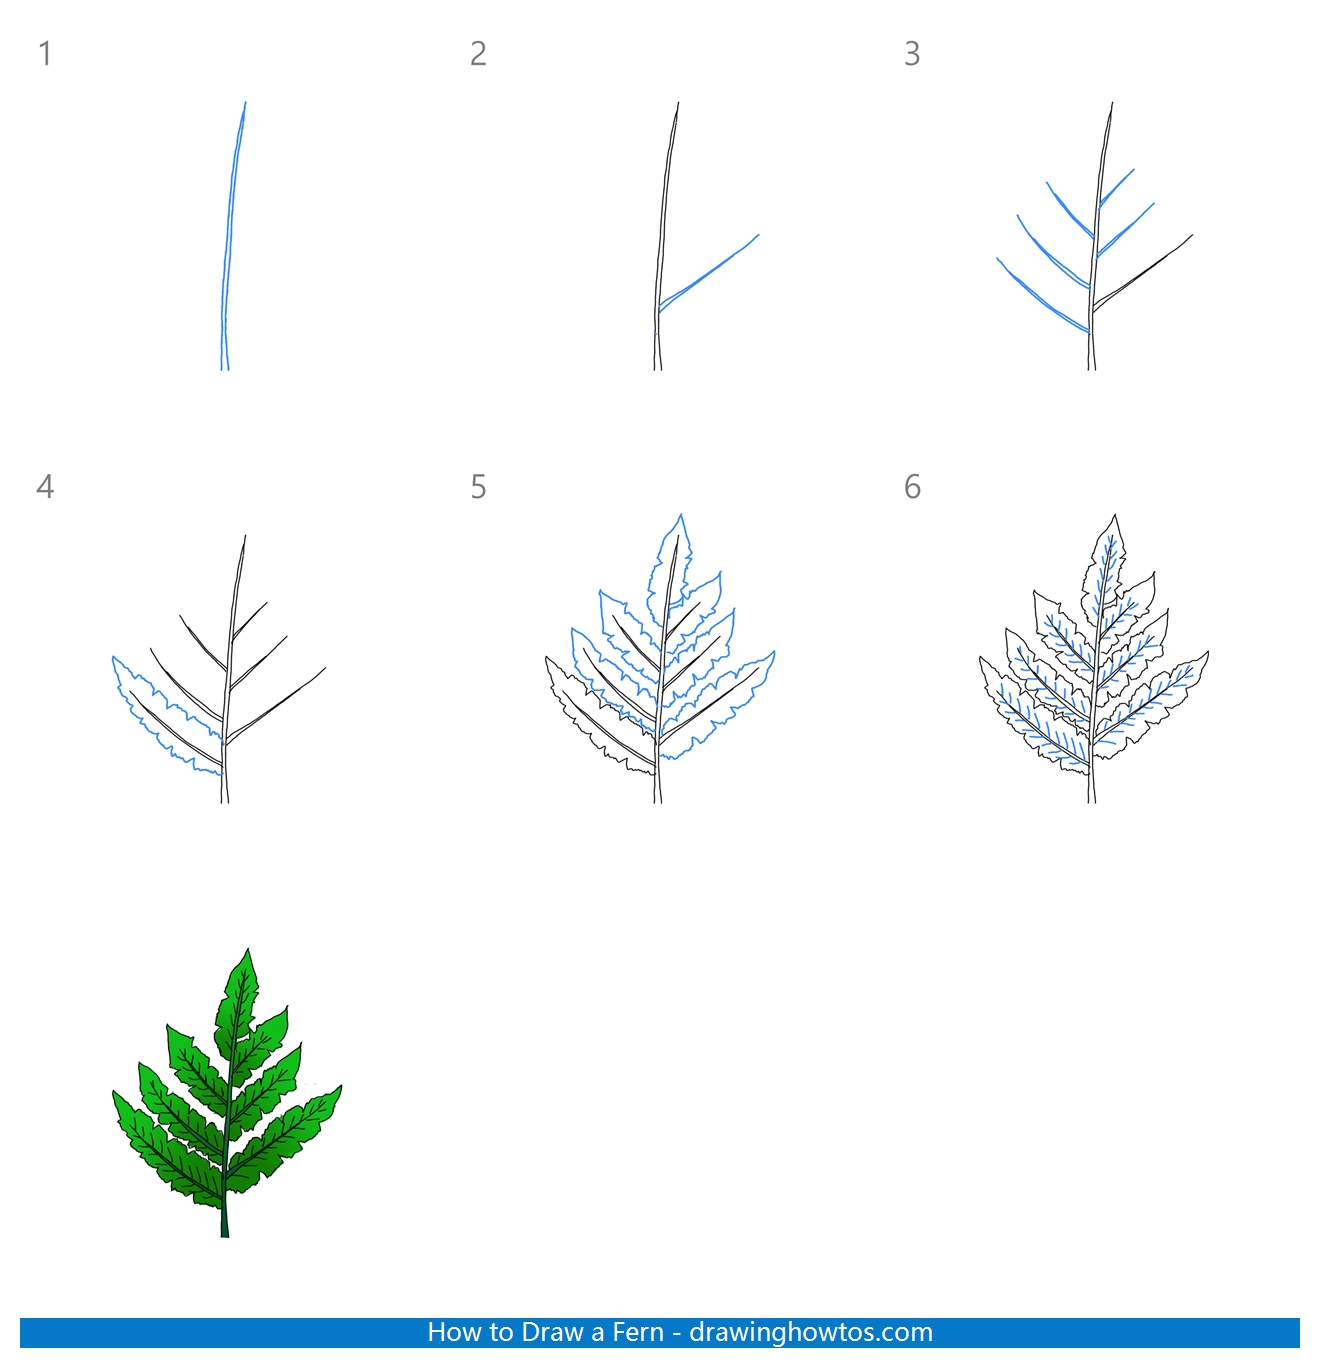 How to Draw a Fern Step by Step